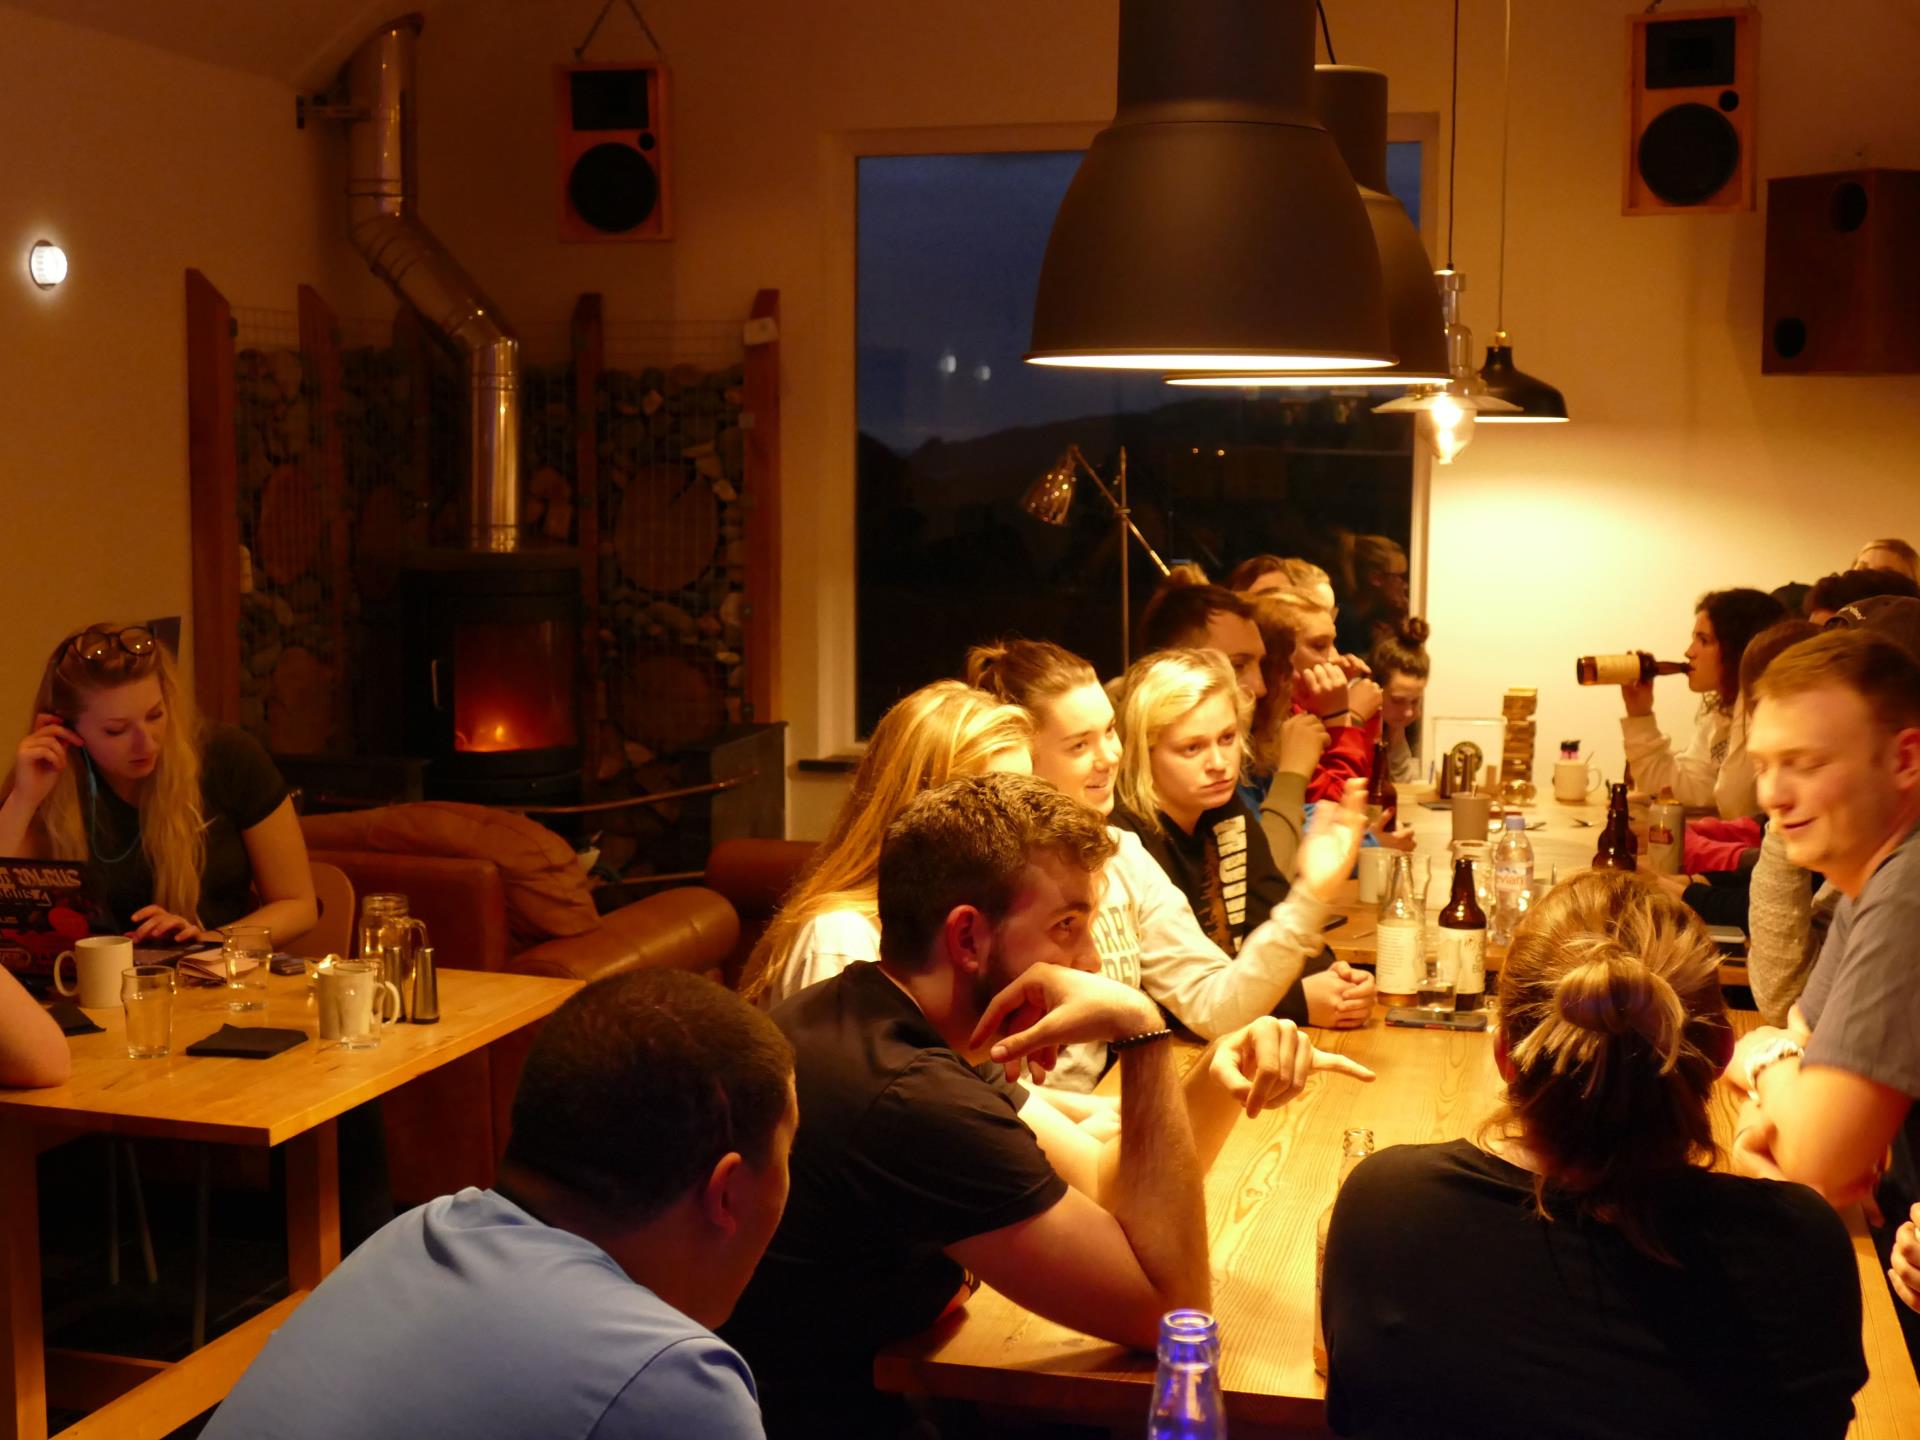 Team building eco lodge accommodation Wales